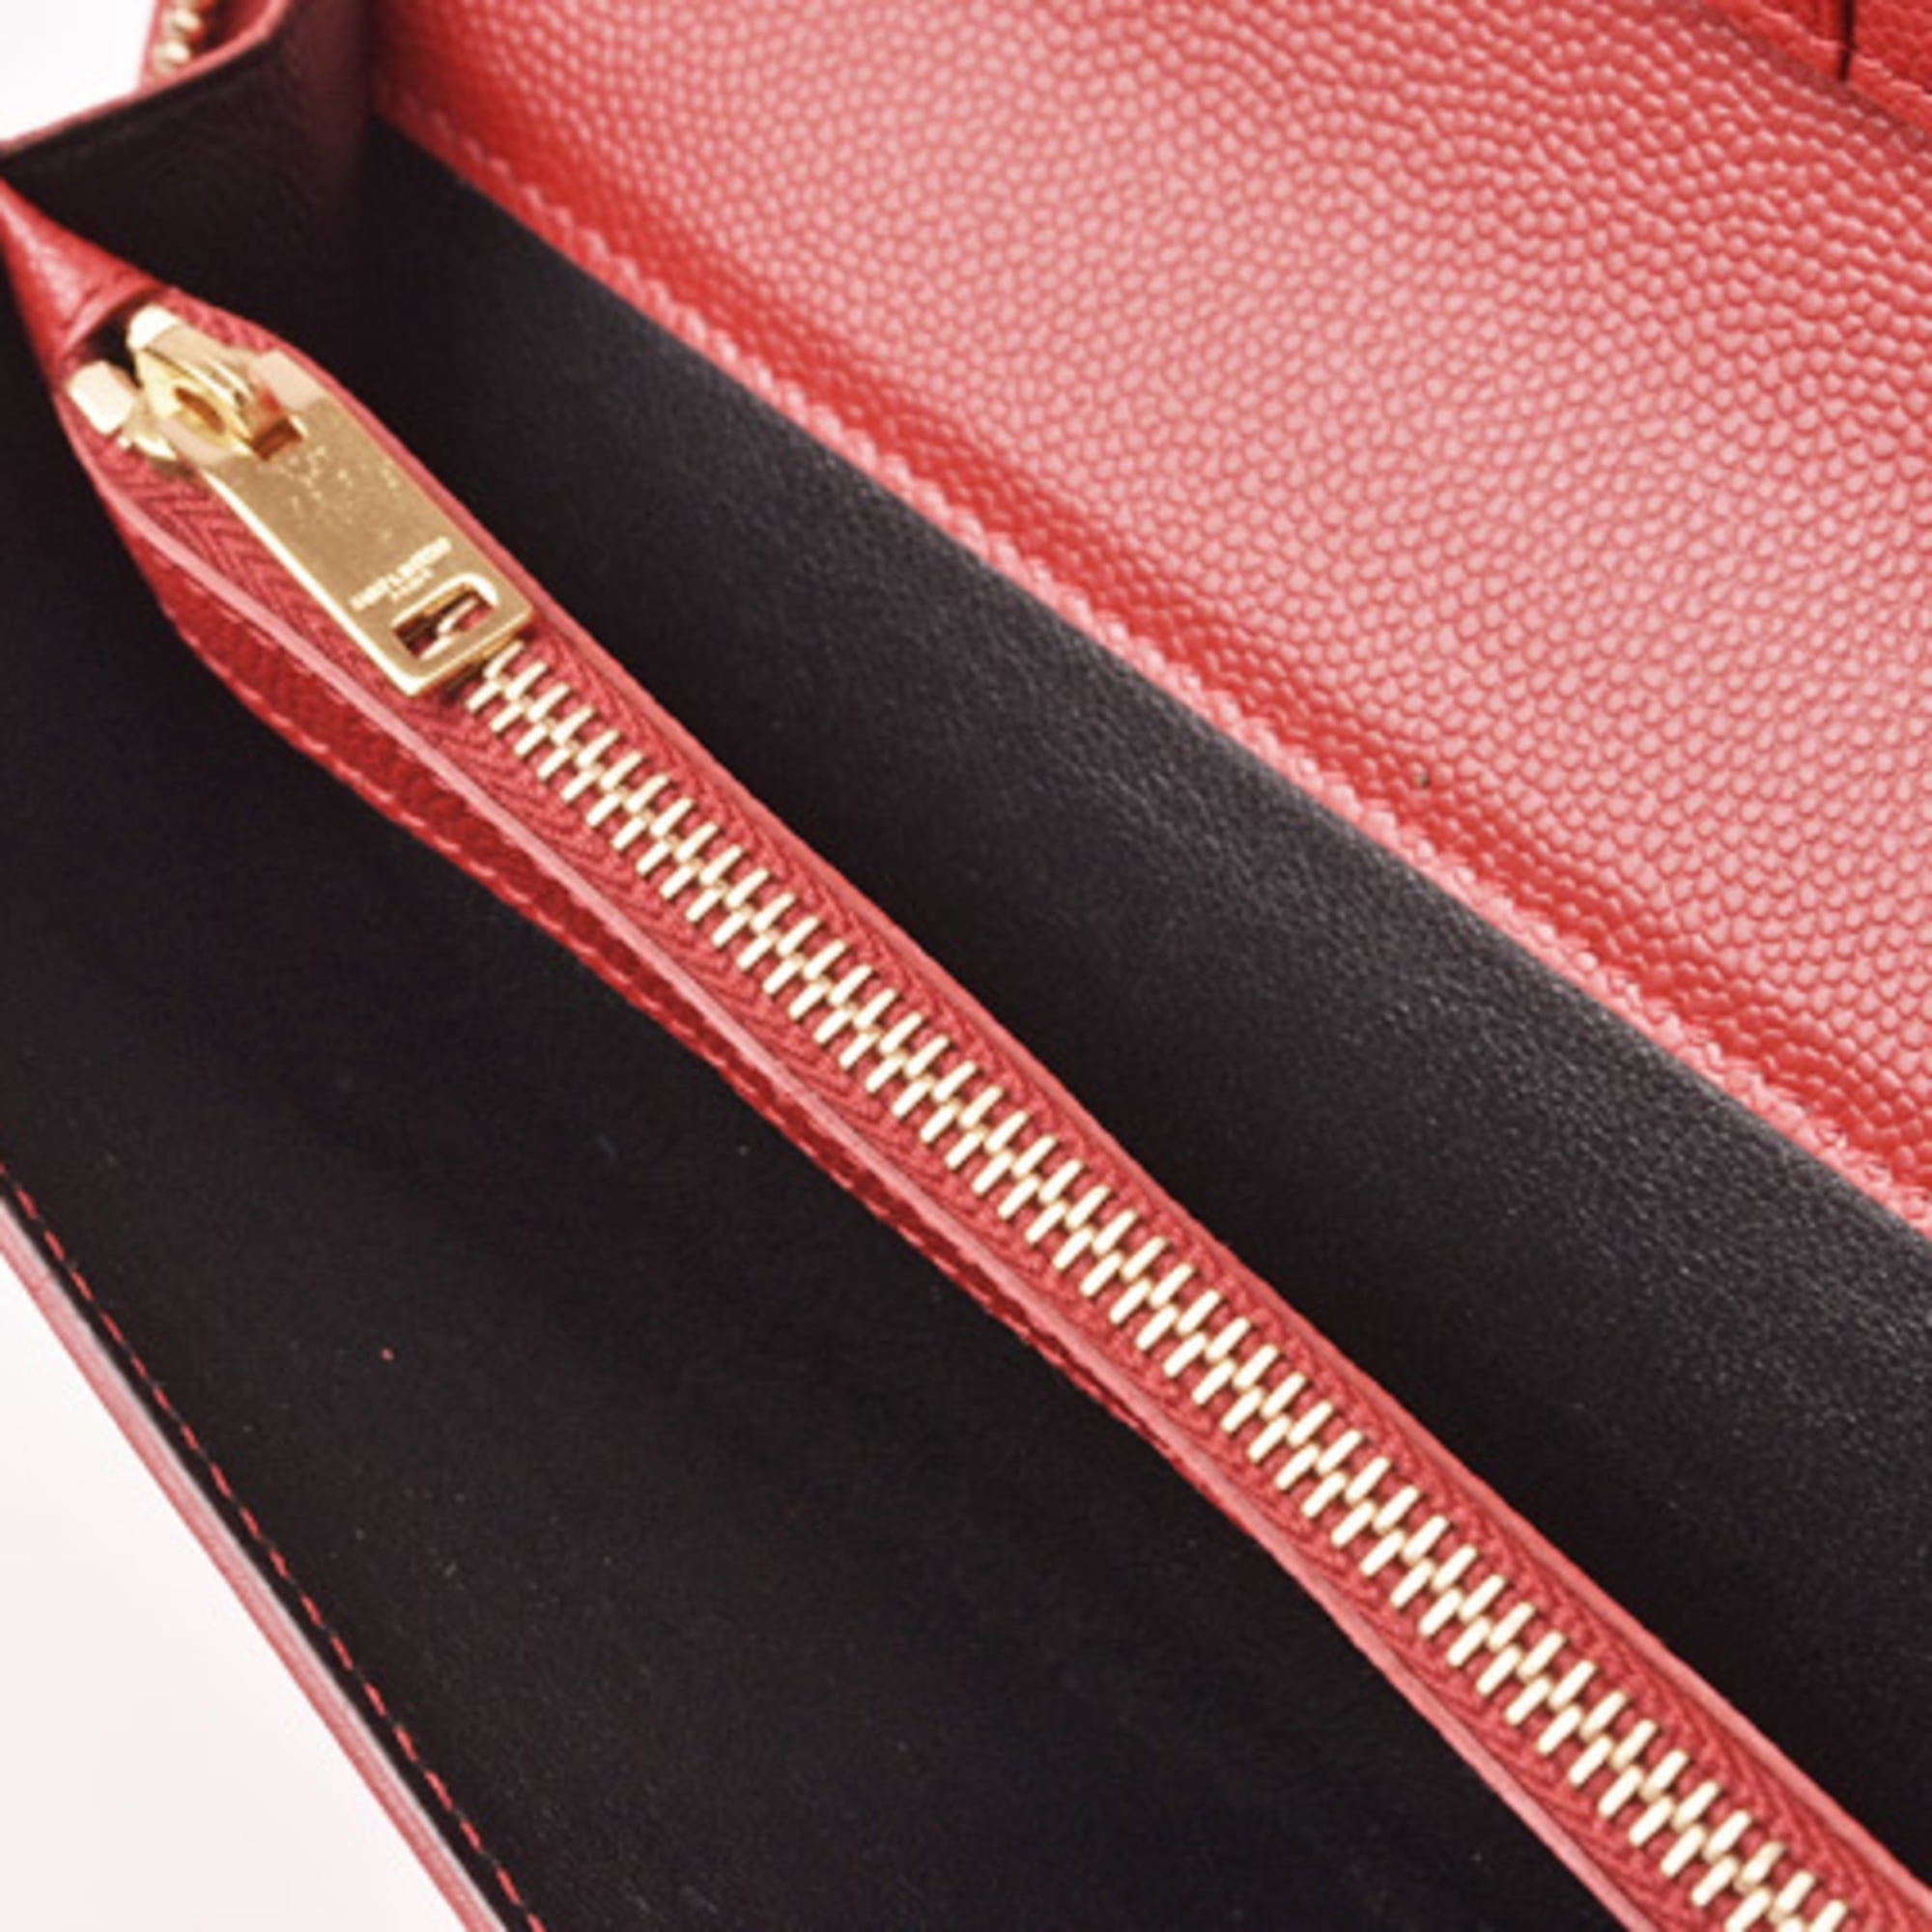 Leather wallet Yves Saint Laurent Red in Leather - 25675165